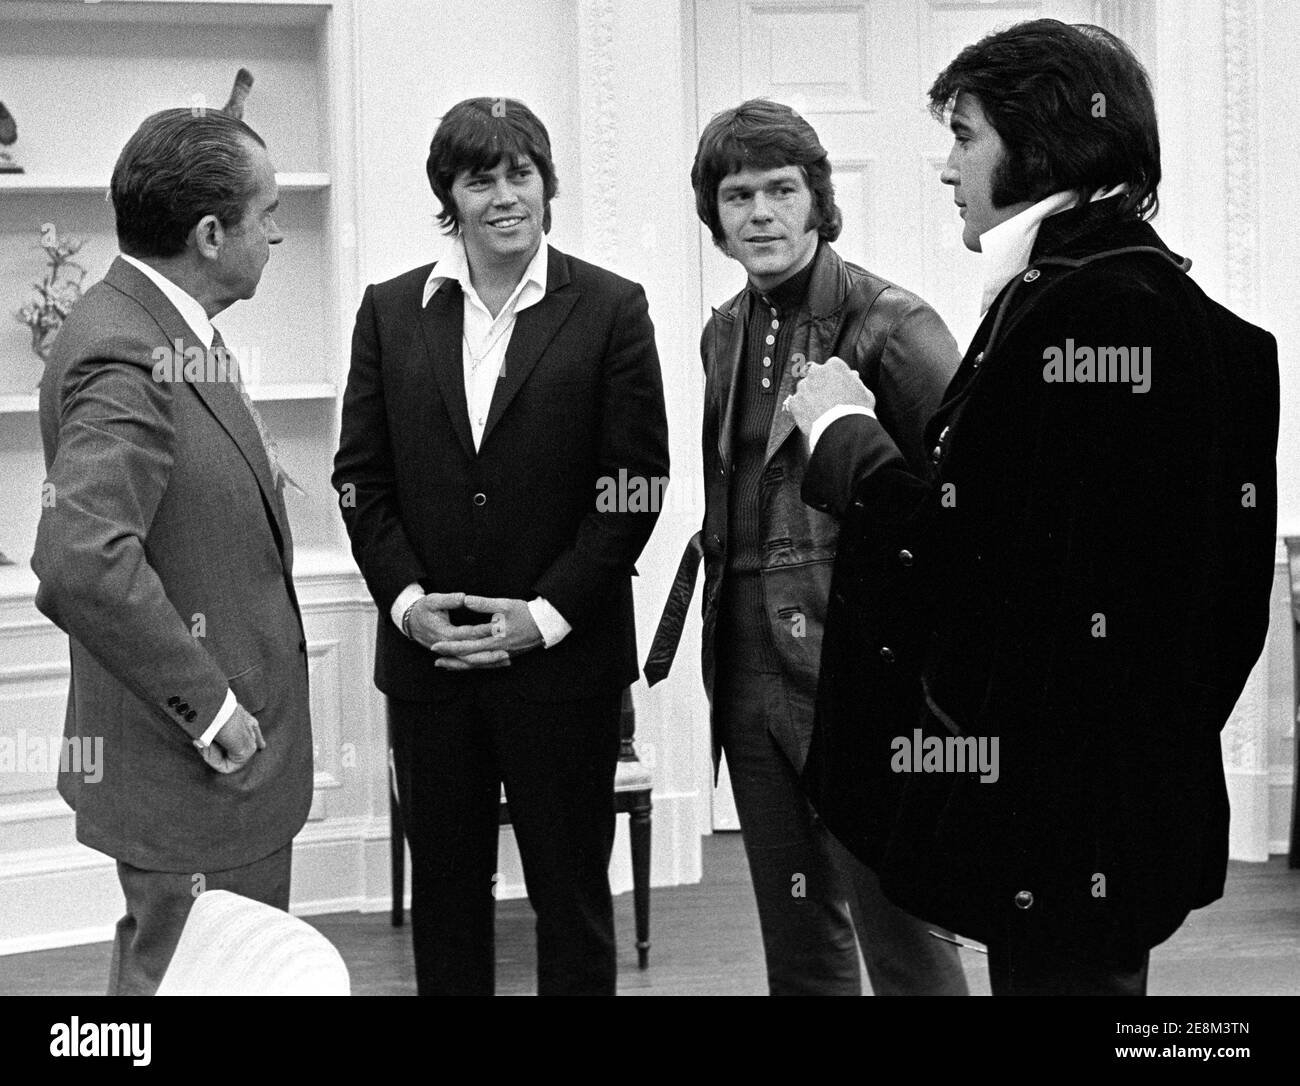 Elvis Presley at the White House 1970 with Nixon, Sonny West and Jerry Schilling. Stock Photo